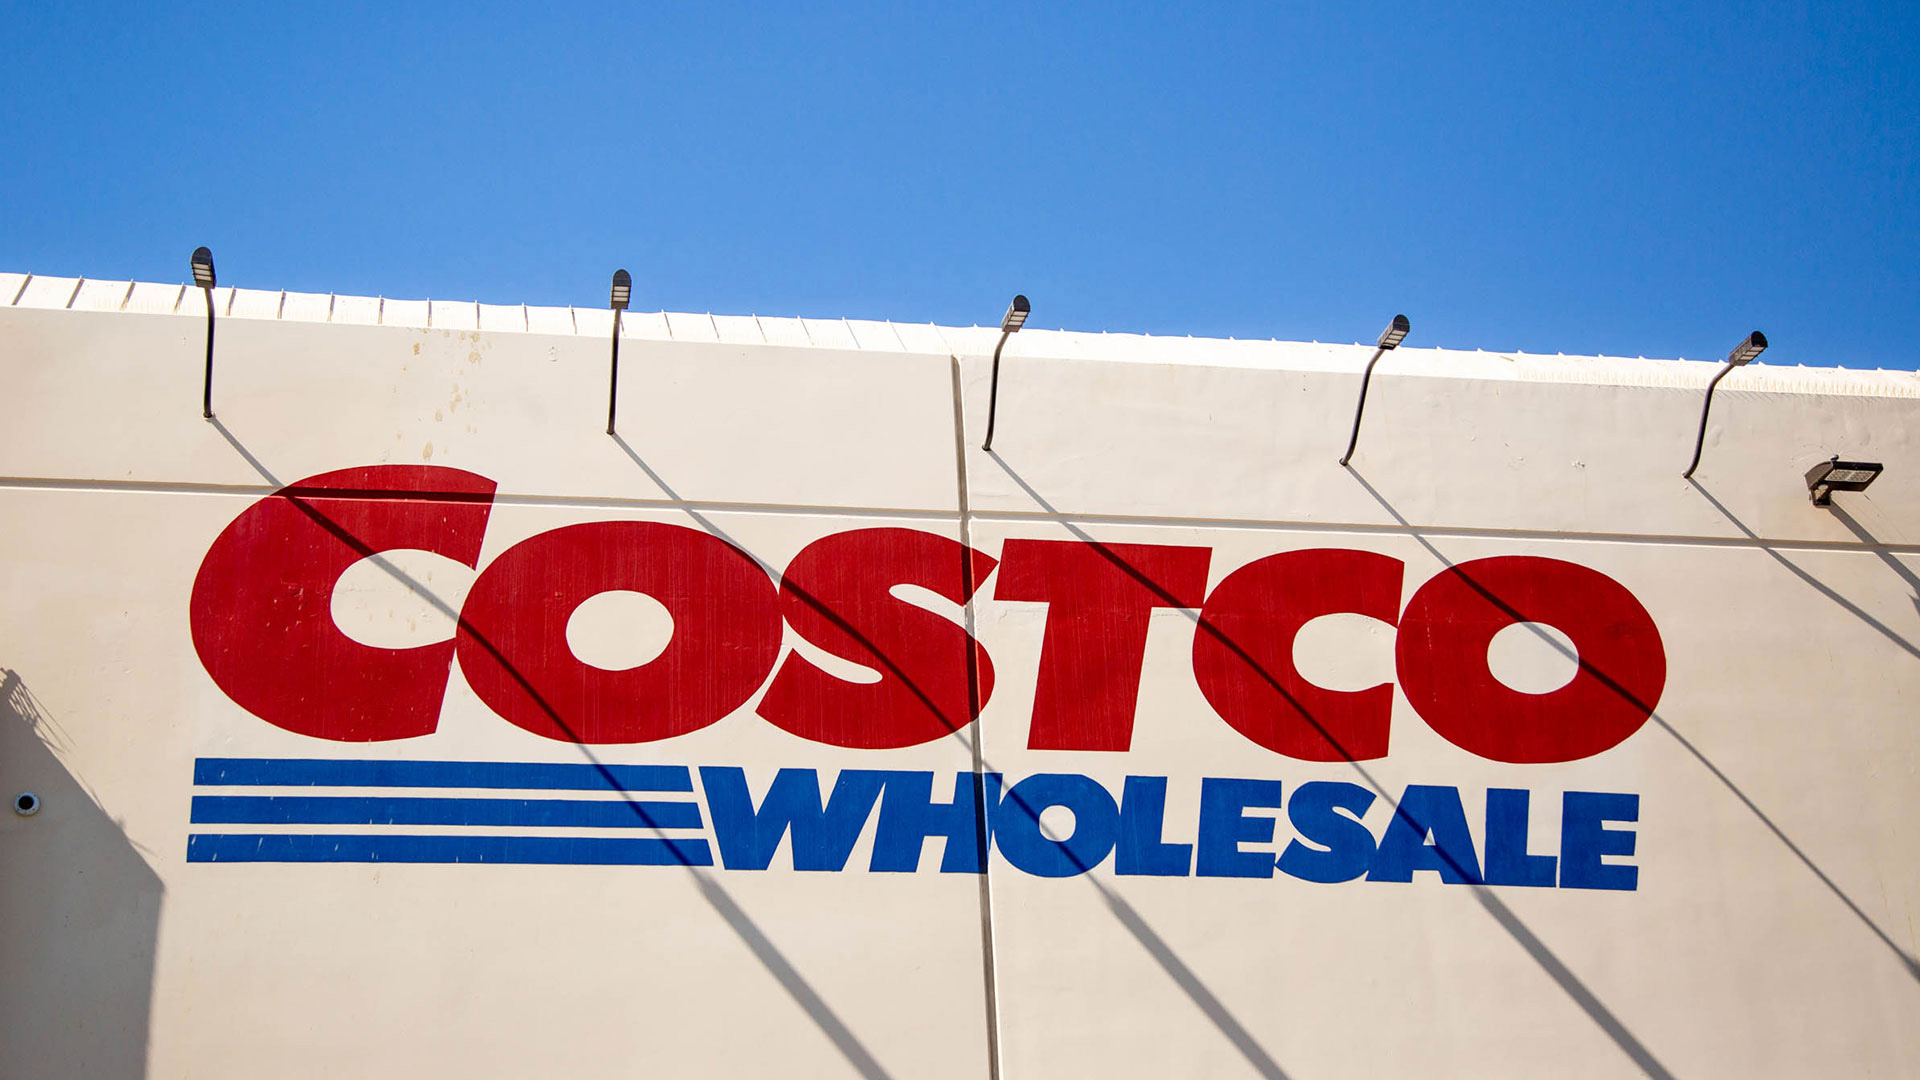 Costco exterior storefront sign